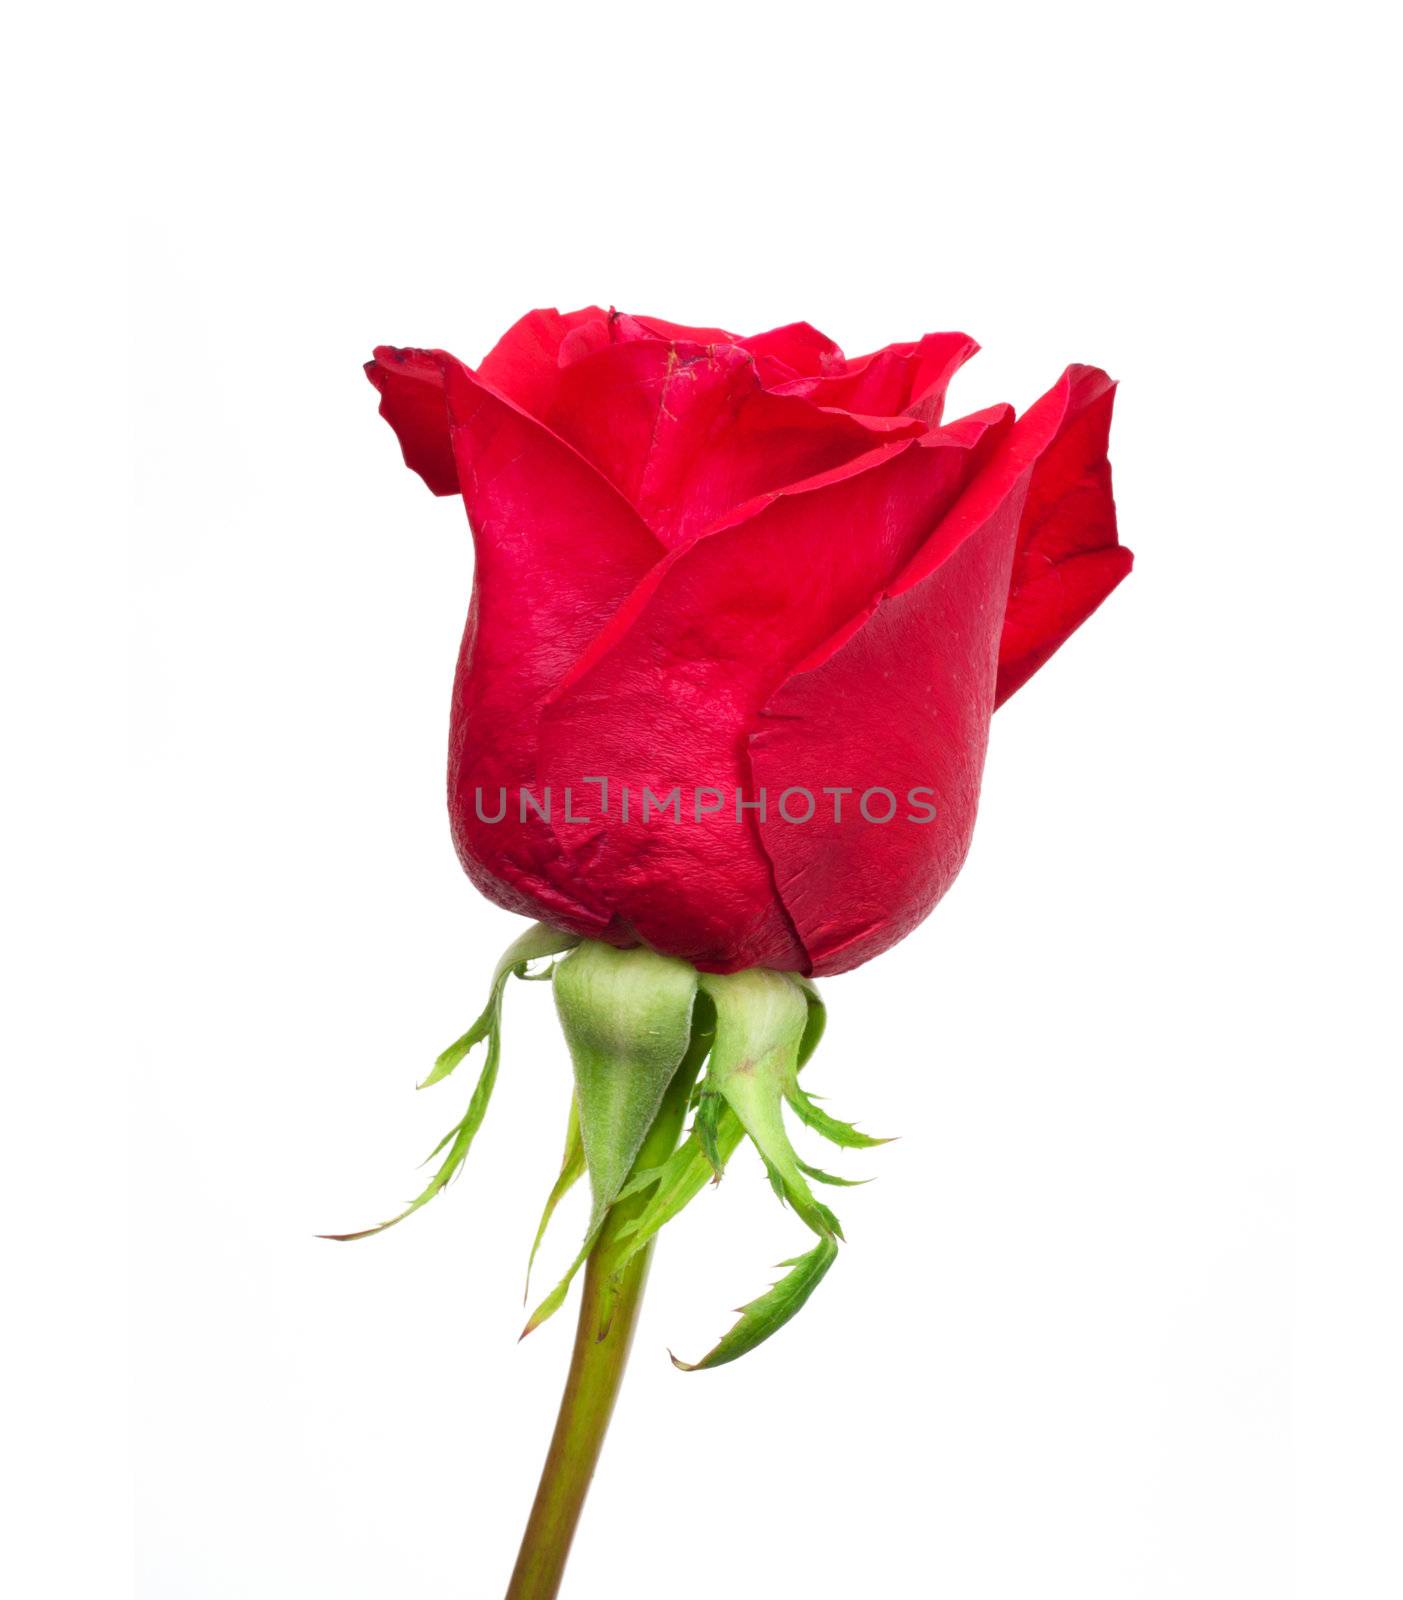 Red rose on white background 